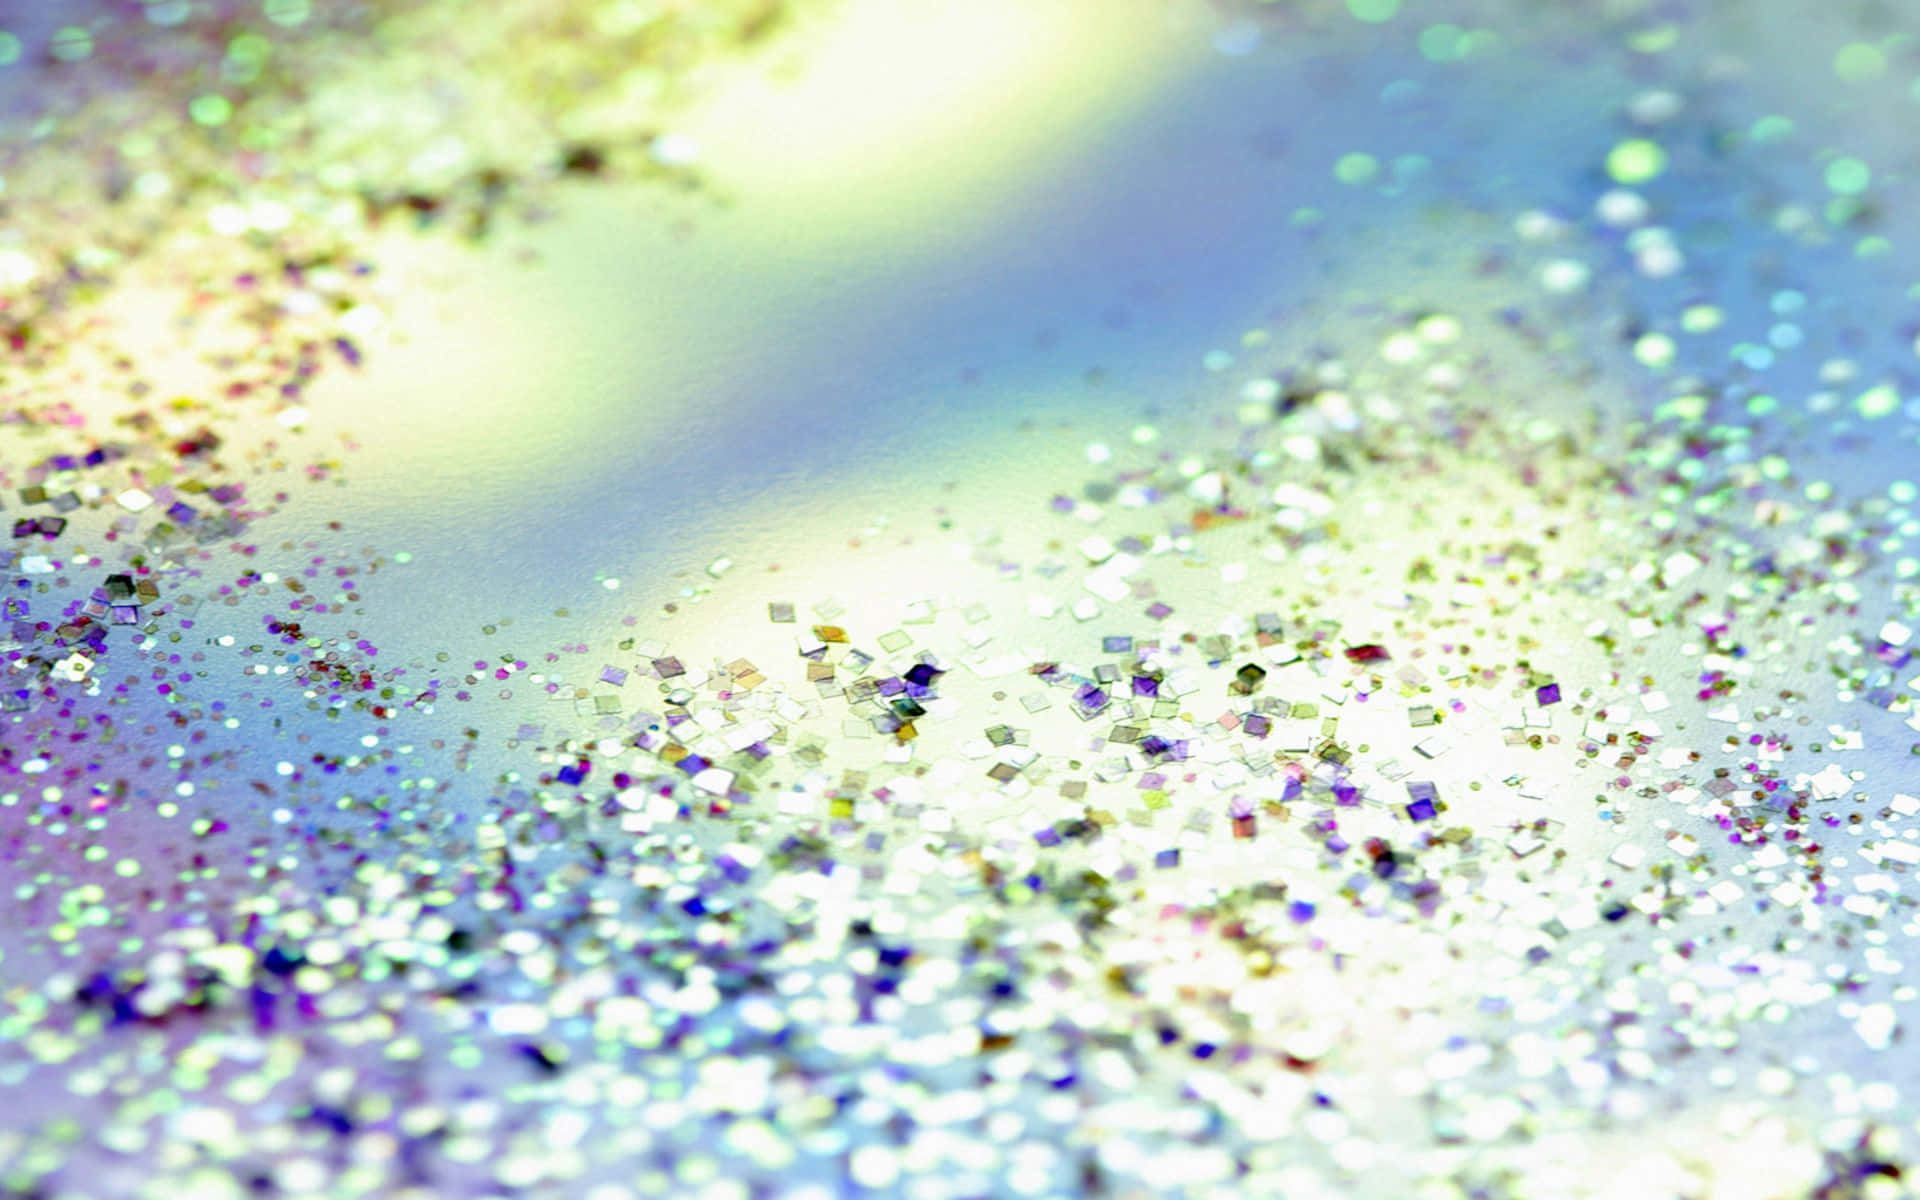 Get Ready To Shine With This Sparkly Background